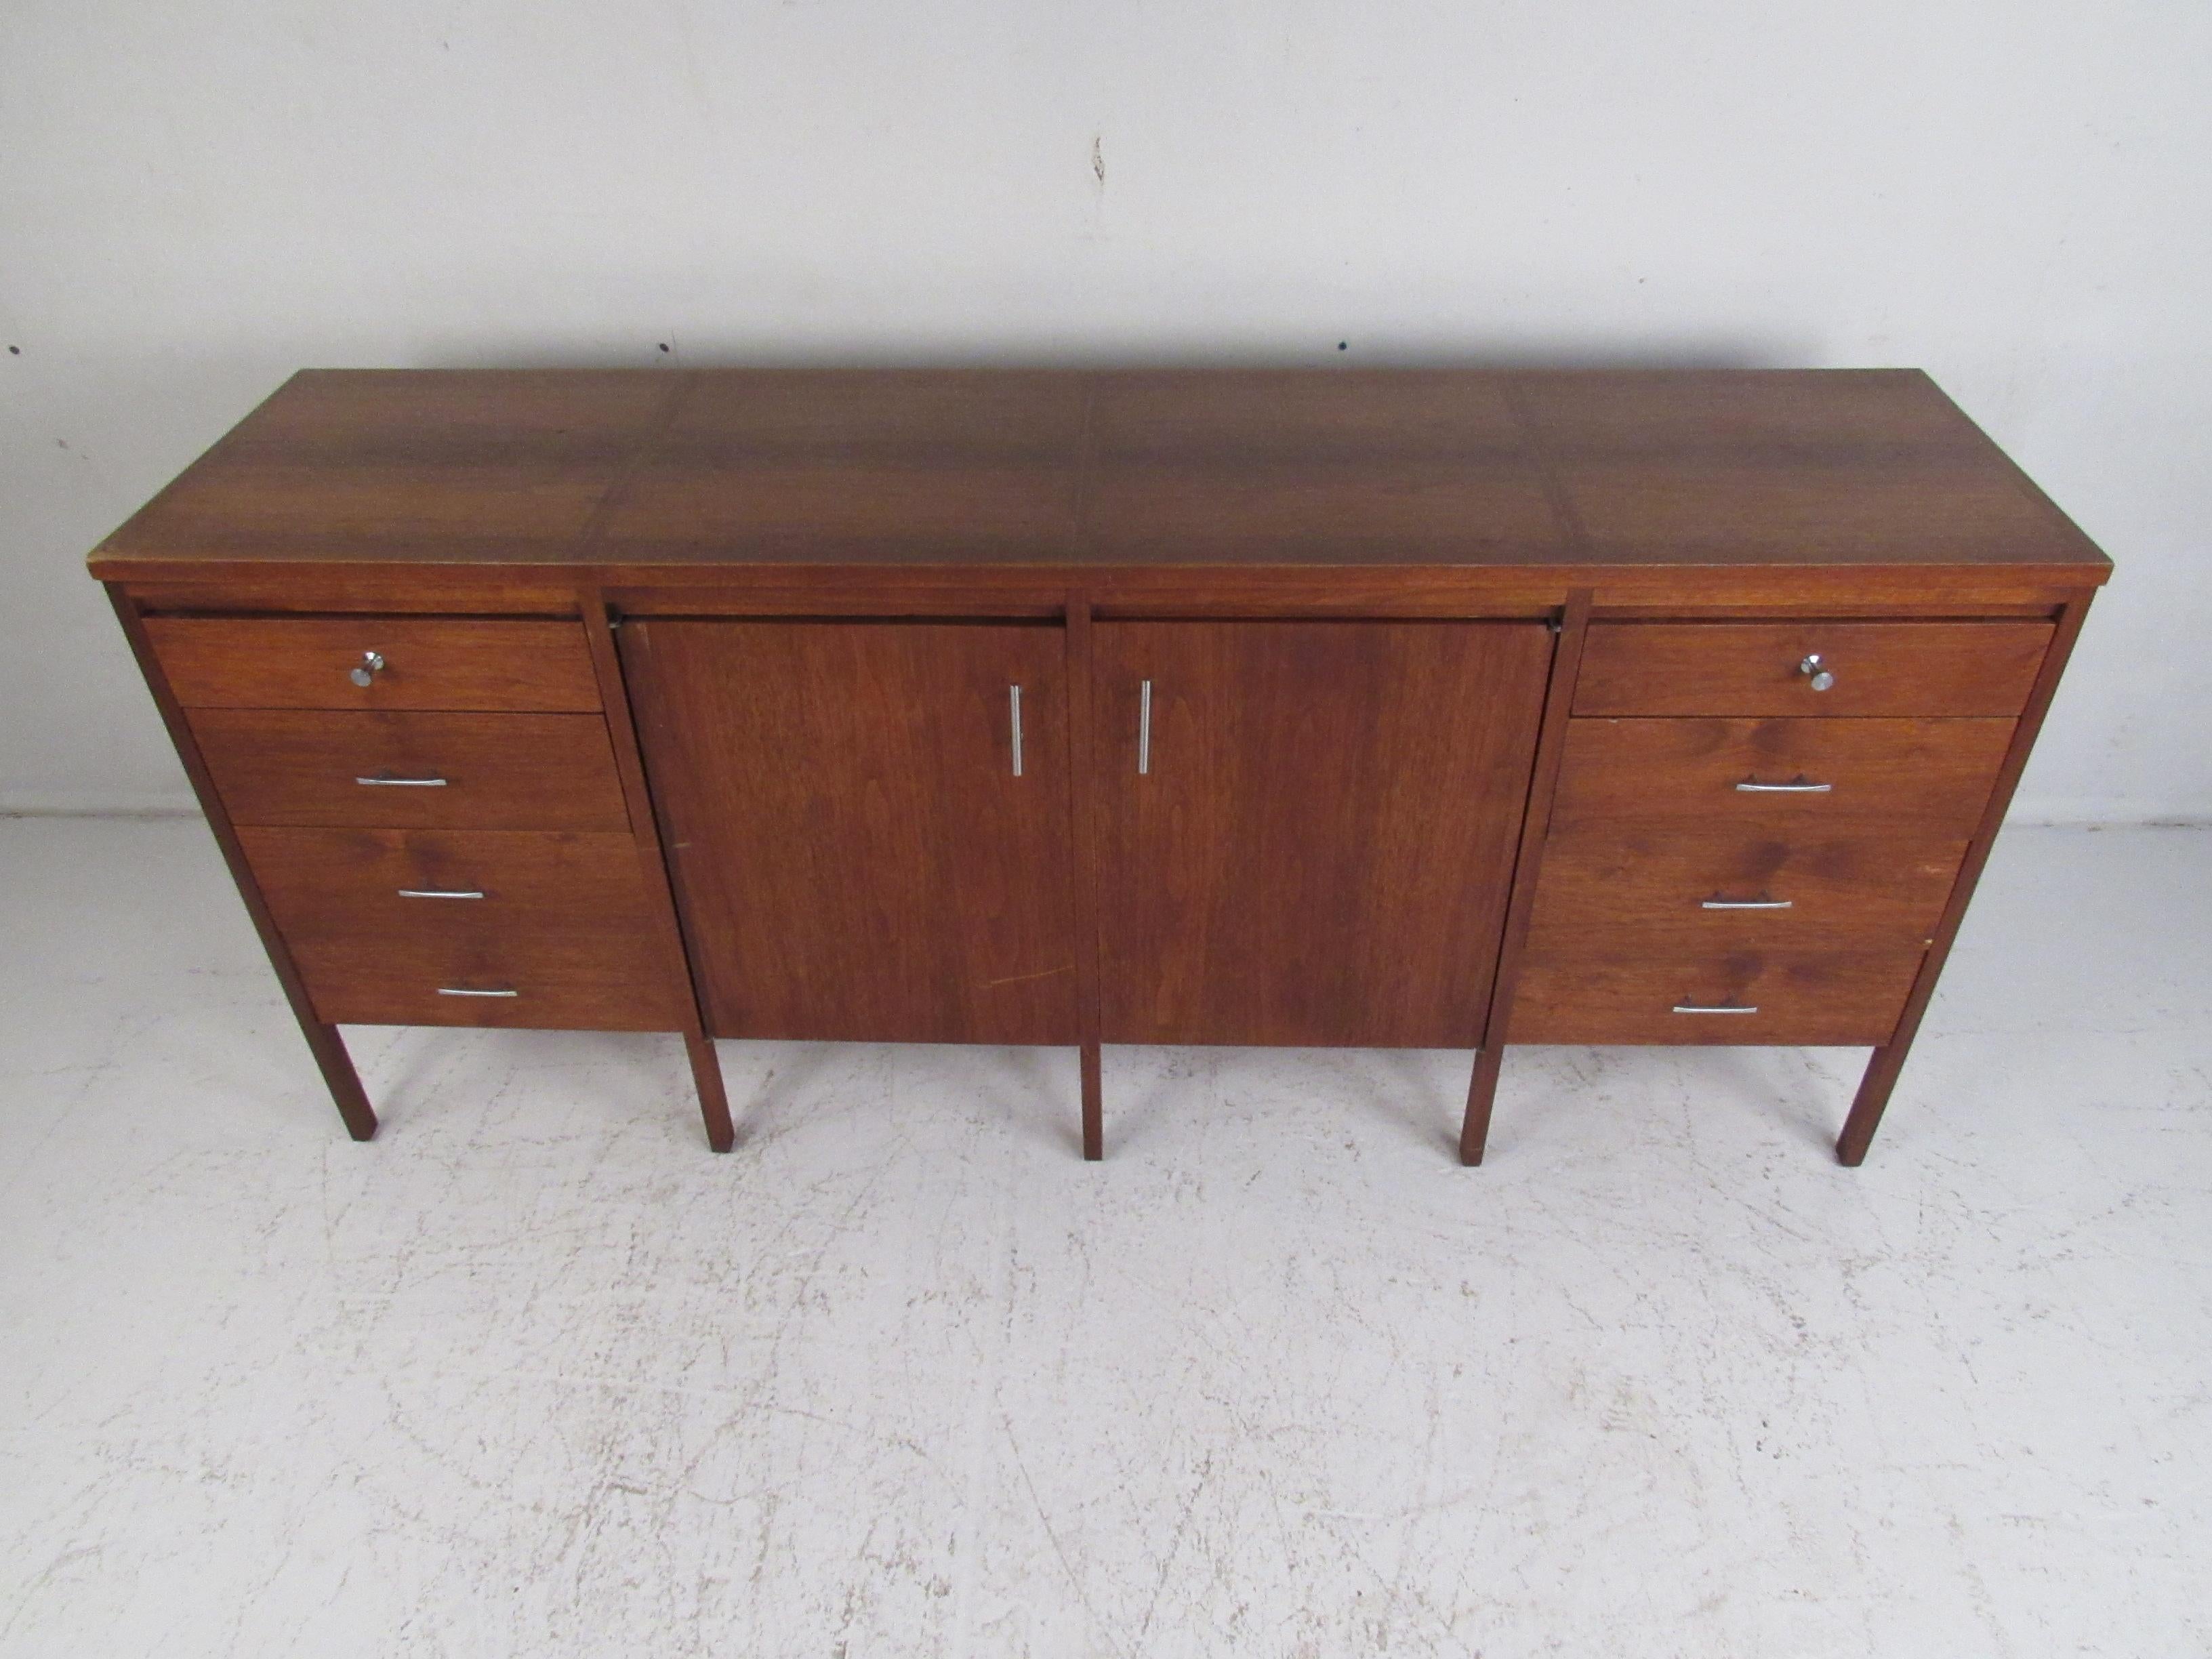 This beautiful vintage modern dresser boasts sixteen hefty drawers ensuring plenty of room for storage within its compact design. A stylish case piece with cabinet doors in the center hiding additional storage. Quality craftsmanship with vertical